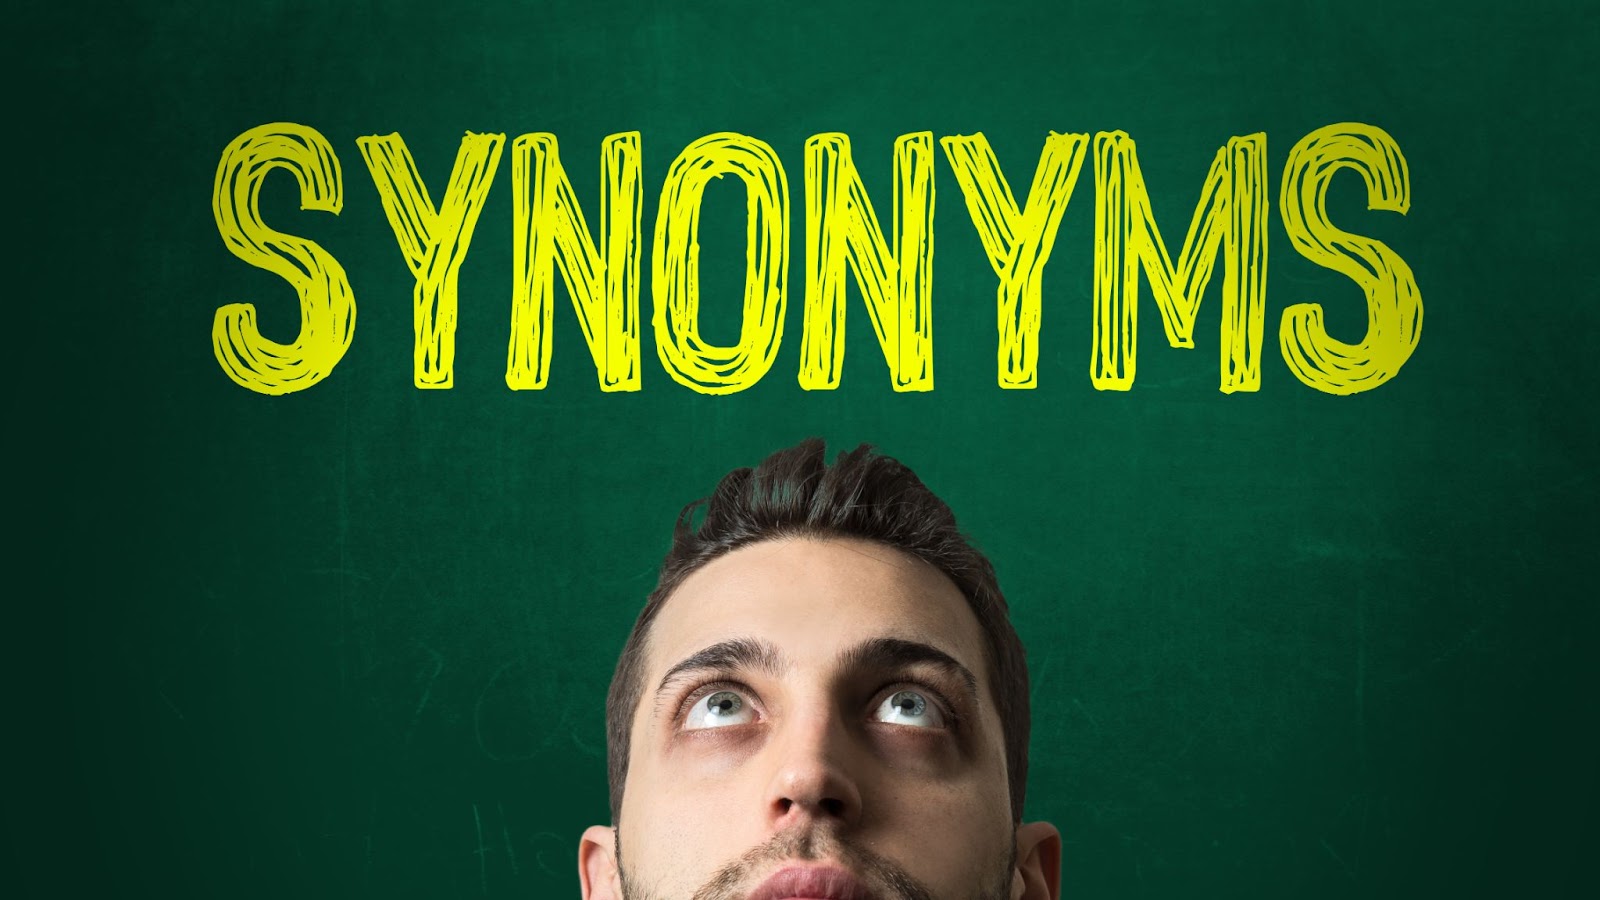 Synonym Definition: What are Synonyms and How to use them?